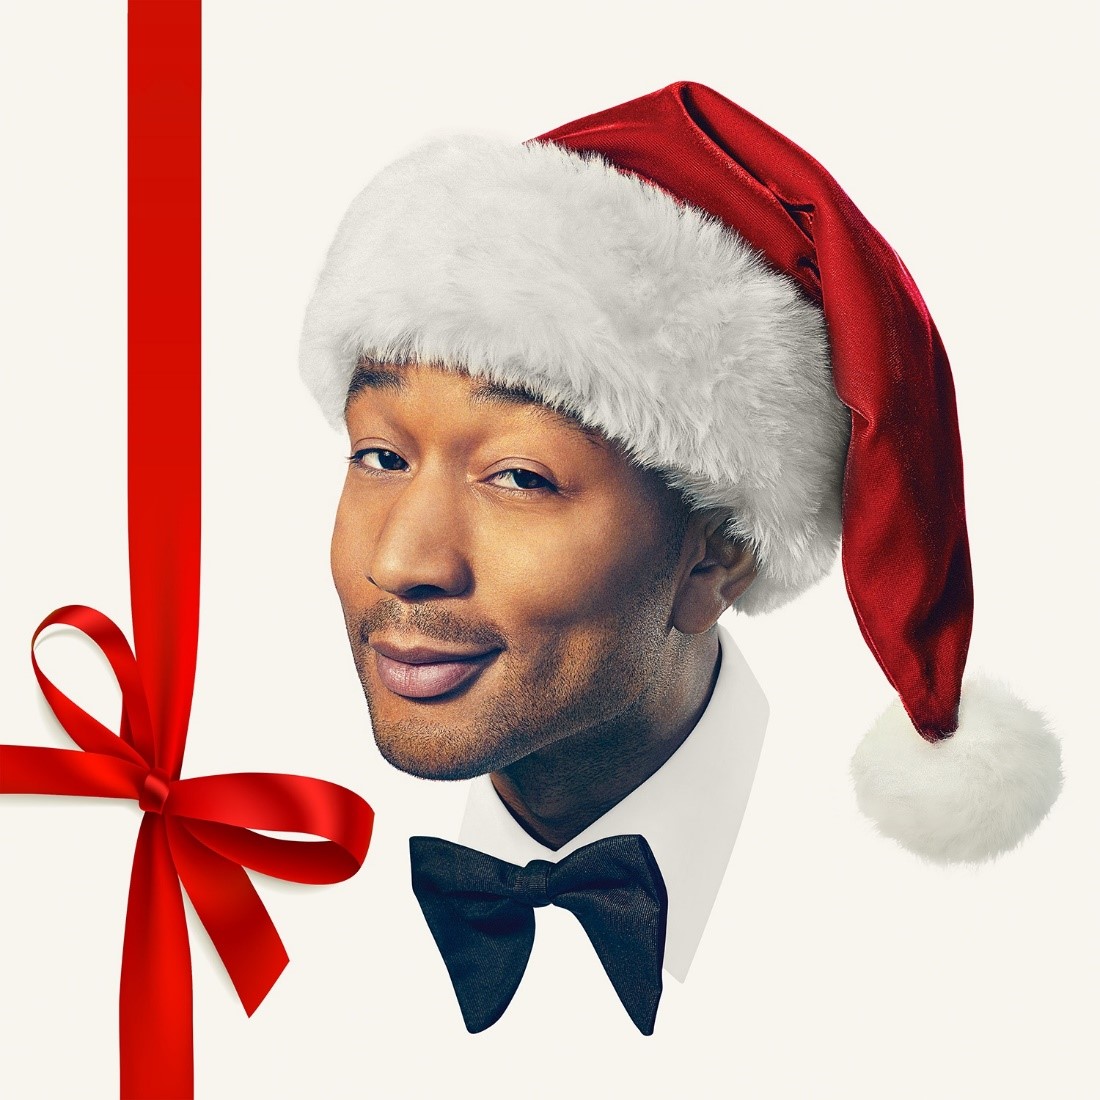 John Legend to Release Deluxe Edition of "A Legendary Christmas" Album